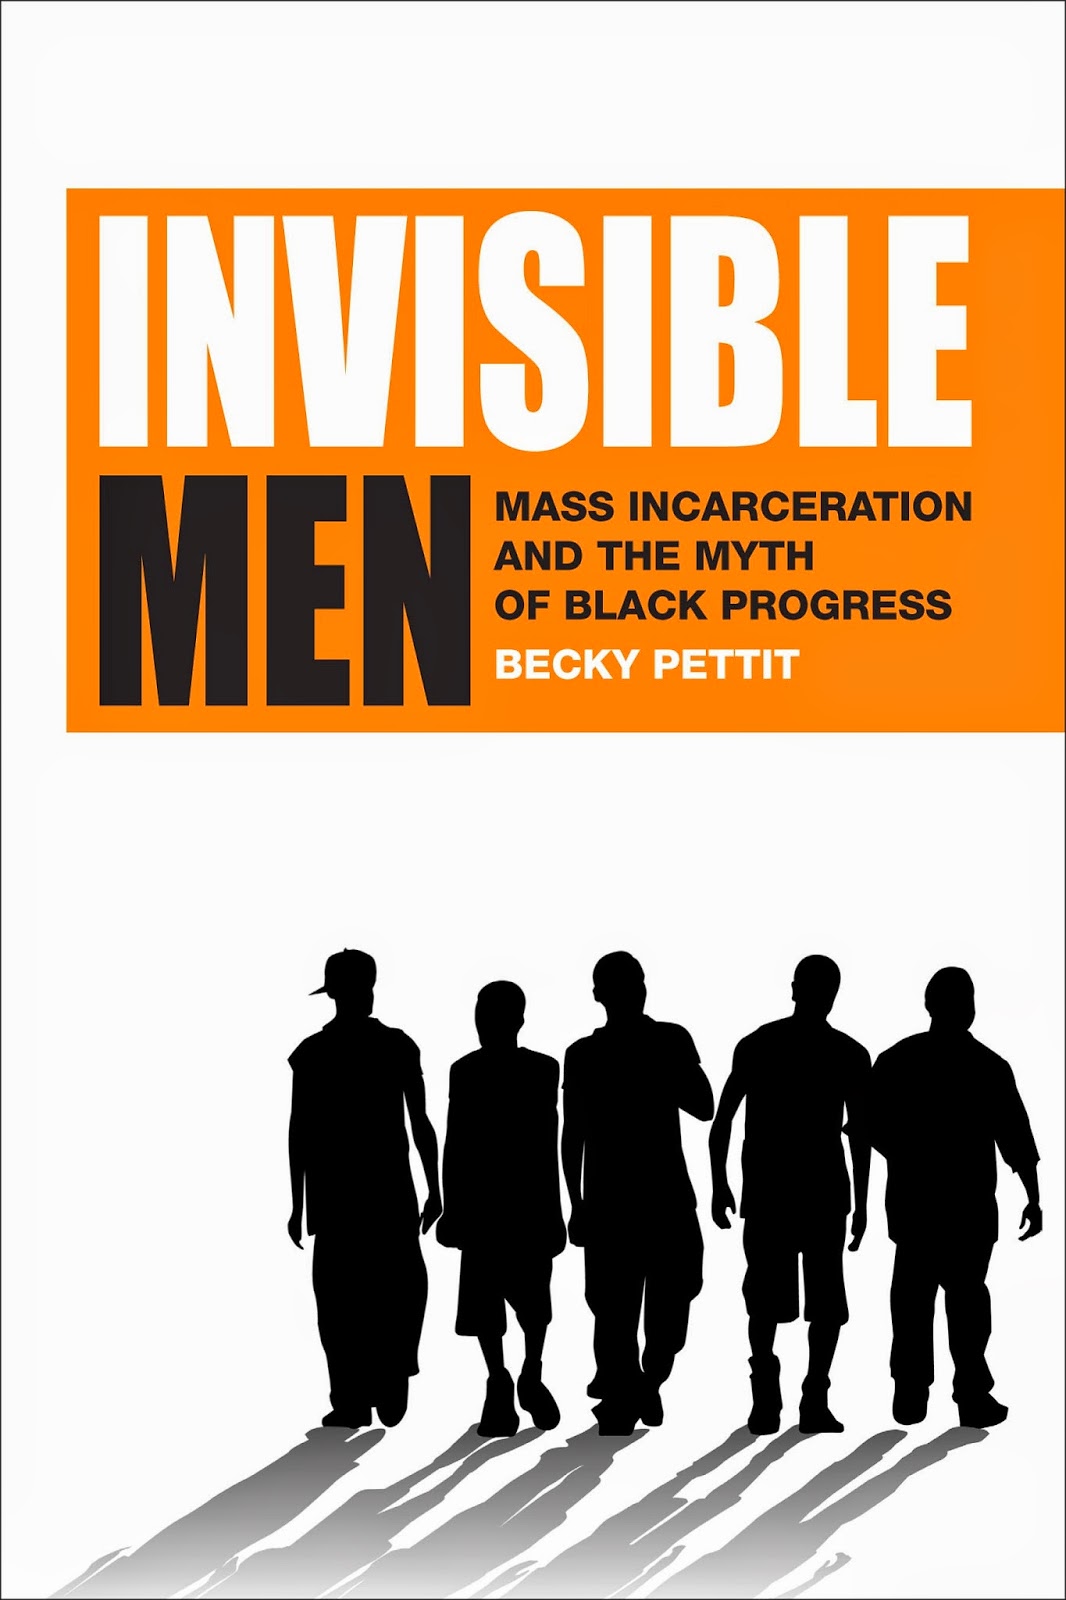 Image book cover: Invisible Men: Mass Incarceration and the Myth of Black Progress by Becky Pettit from https://www.russellsage.org/publications/invisible-men